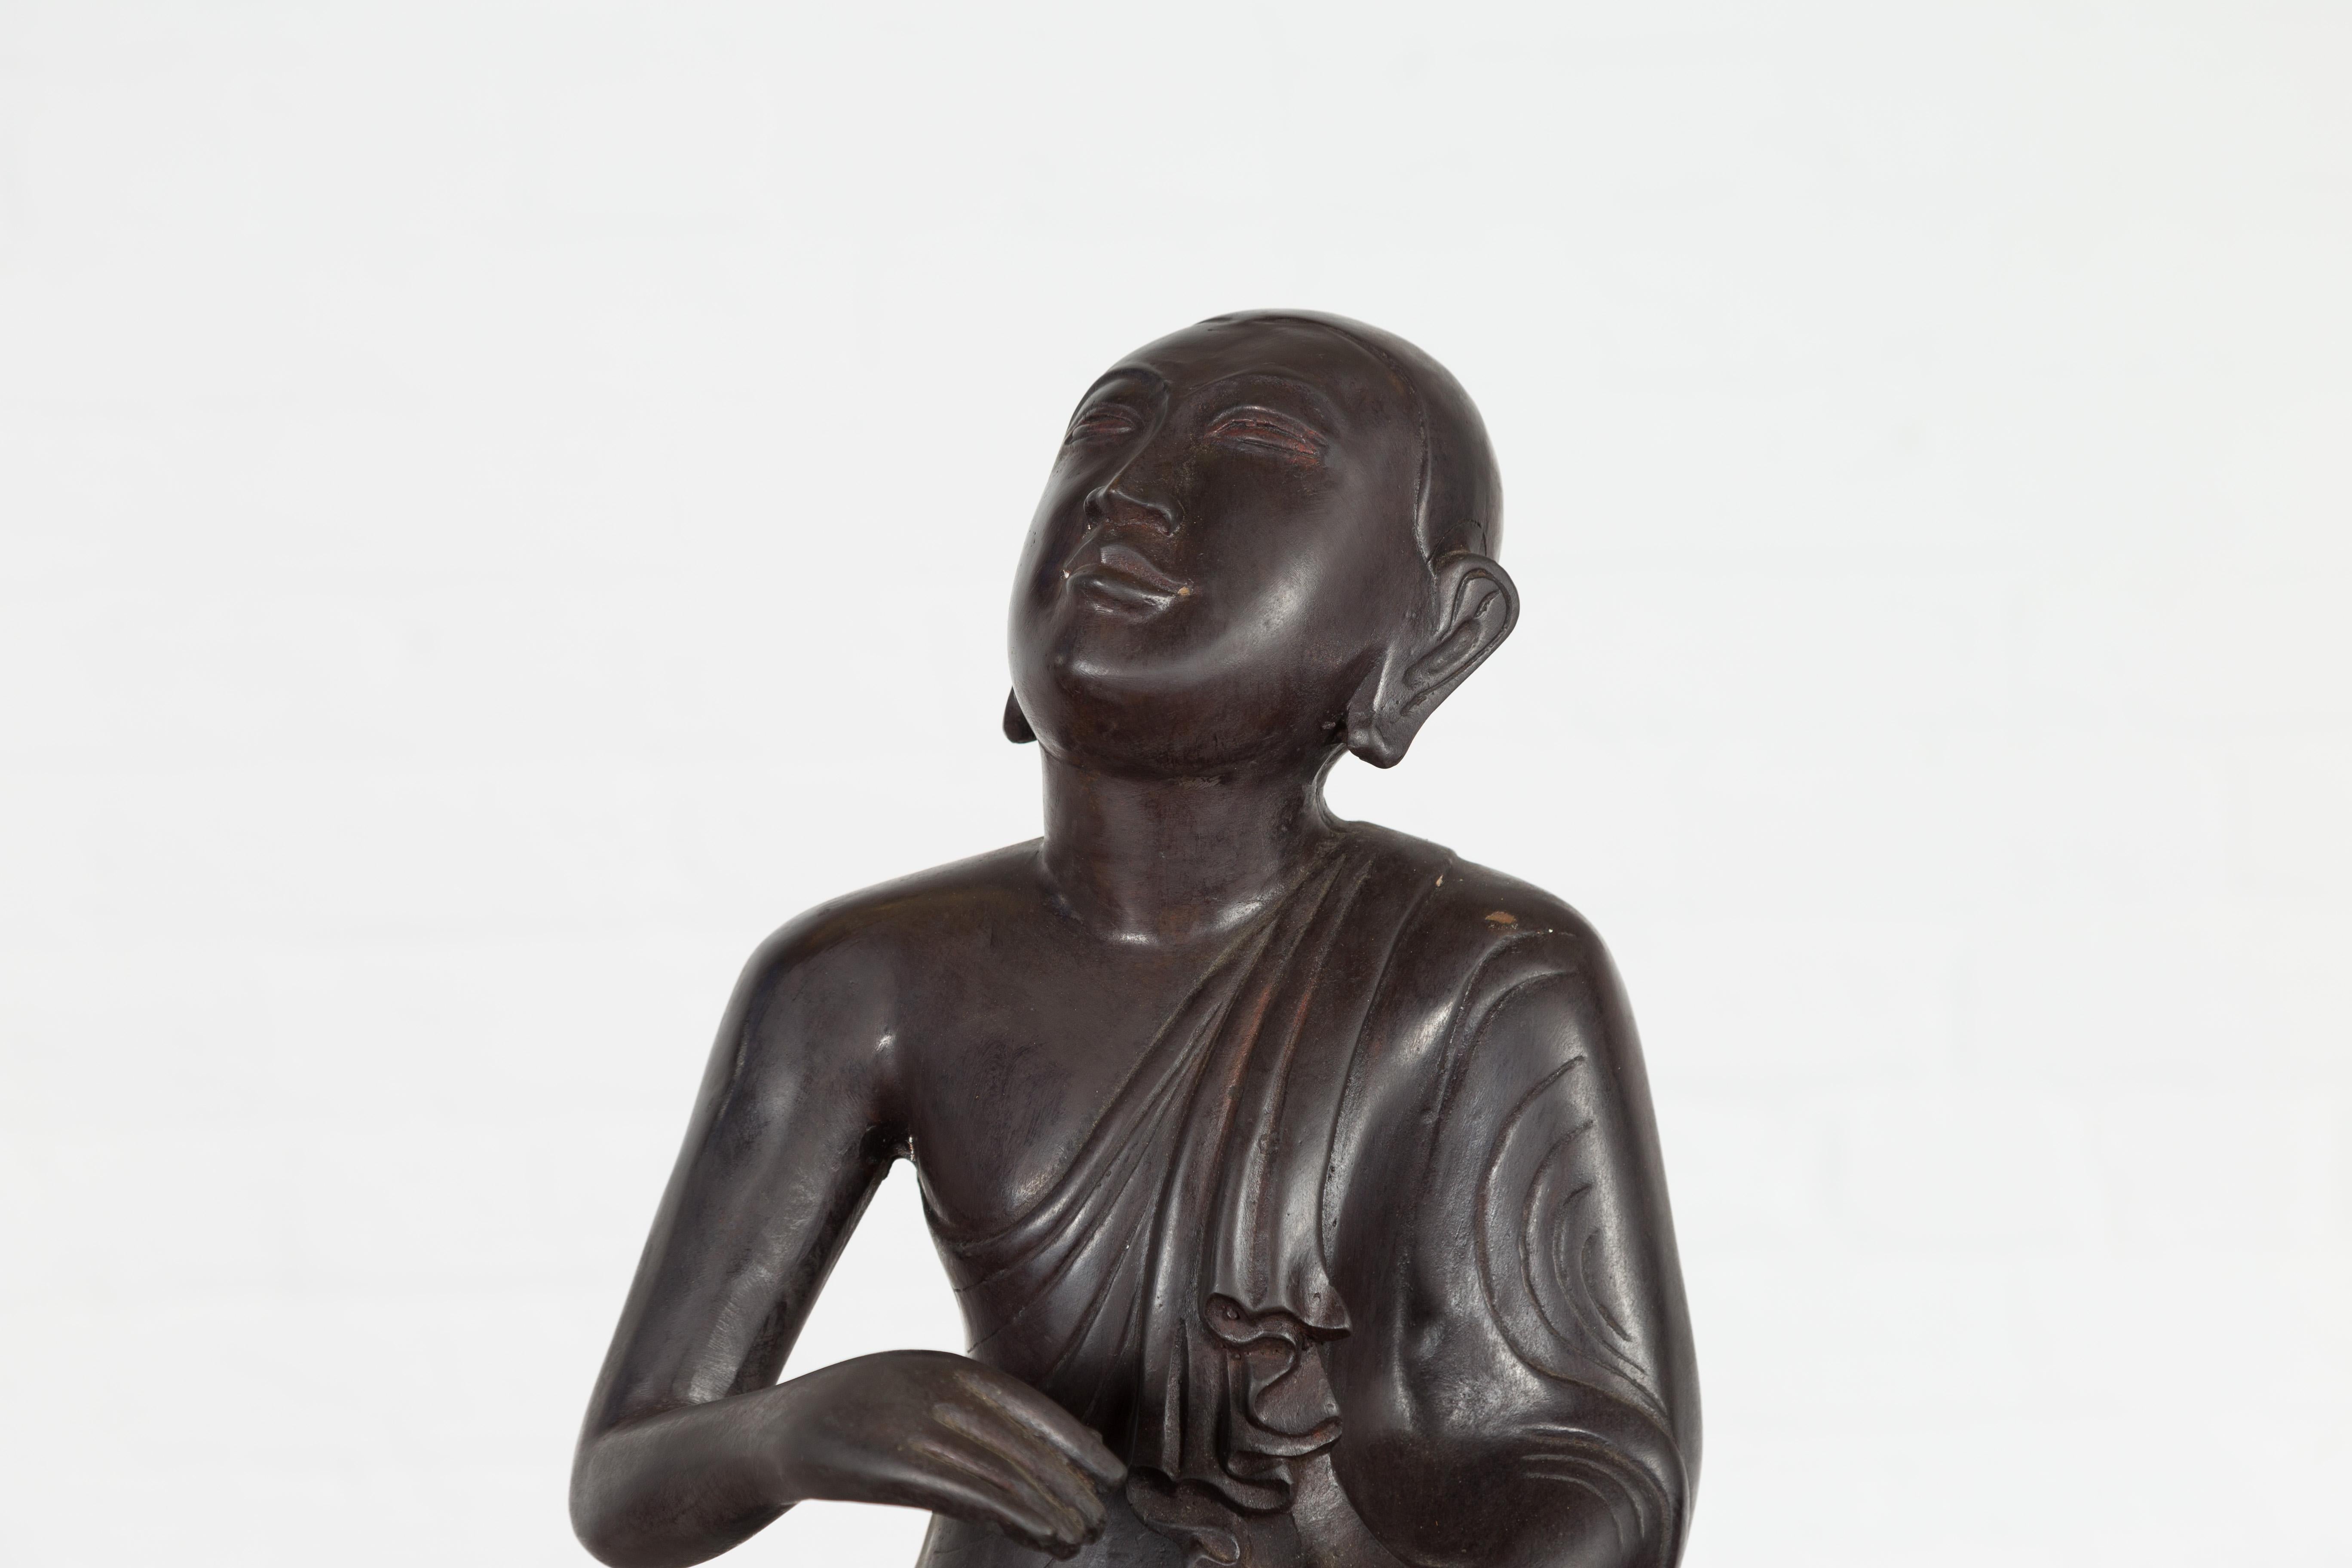 Vintage Bronze Lost Wax Sculpture Depicting a Praying Monk Sitting on a Base For Sale 1